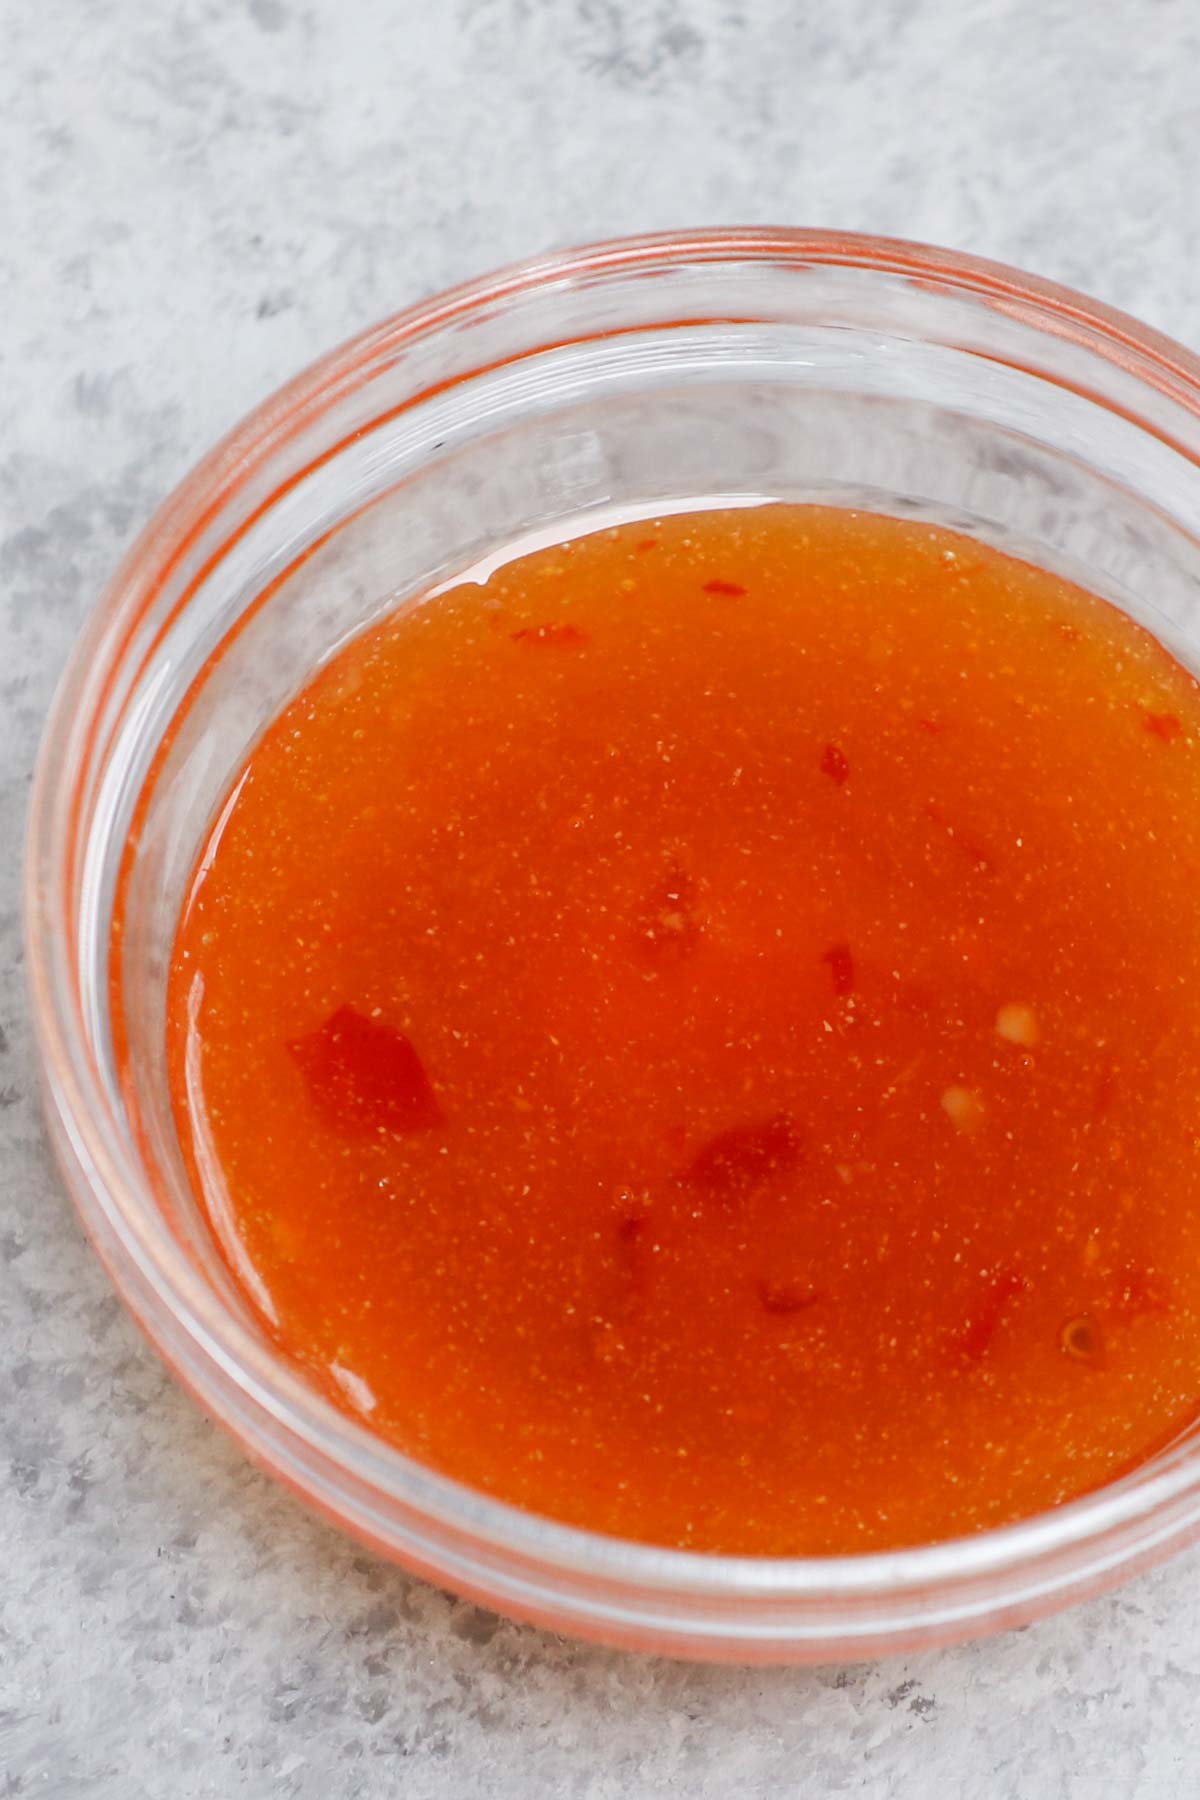 Ever wondered how you can make your very own Duck Sauce? It’s much easier than you think! It is a sweet and sour sauce that’s often used as a dip for spring rolls, crispy noodles, egg rolls, or drizzled on top of your favorite dishes. With only 5 simple ingredients, it takes just a few minutes to put this tangy sauce together.